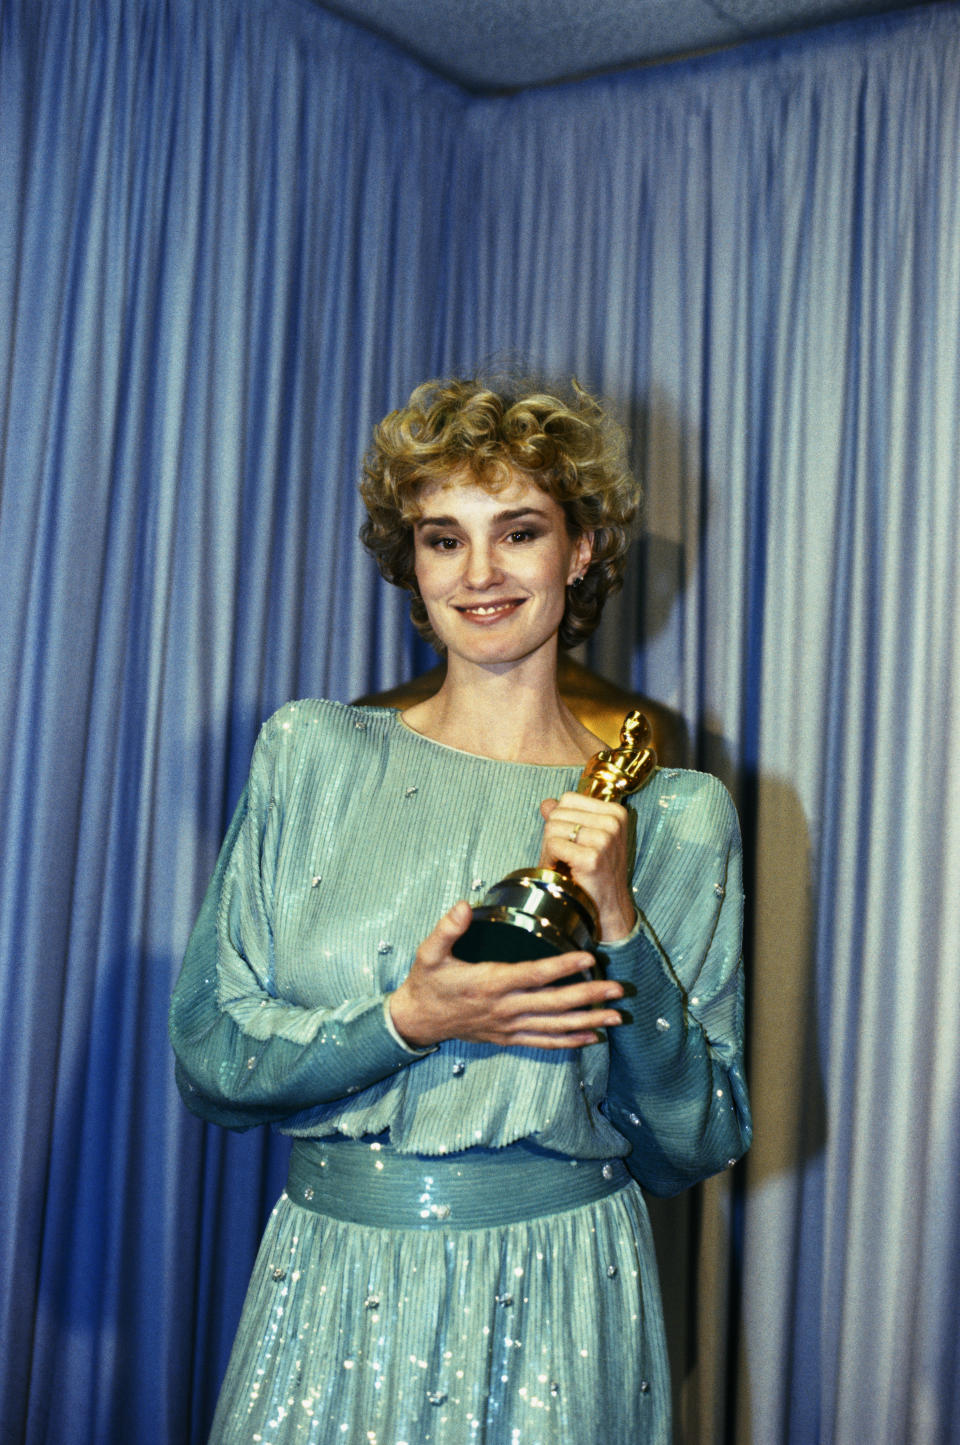 (Original Caption) Hollywood, California: Actress Jessica Lange stands backstage at the 1982 Academy Awards Ceremony holding the Oscar that she won for Best Actress in a Supporting Role for her role in Tootsie.